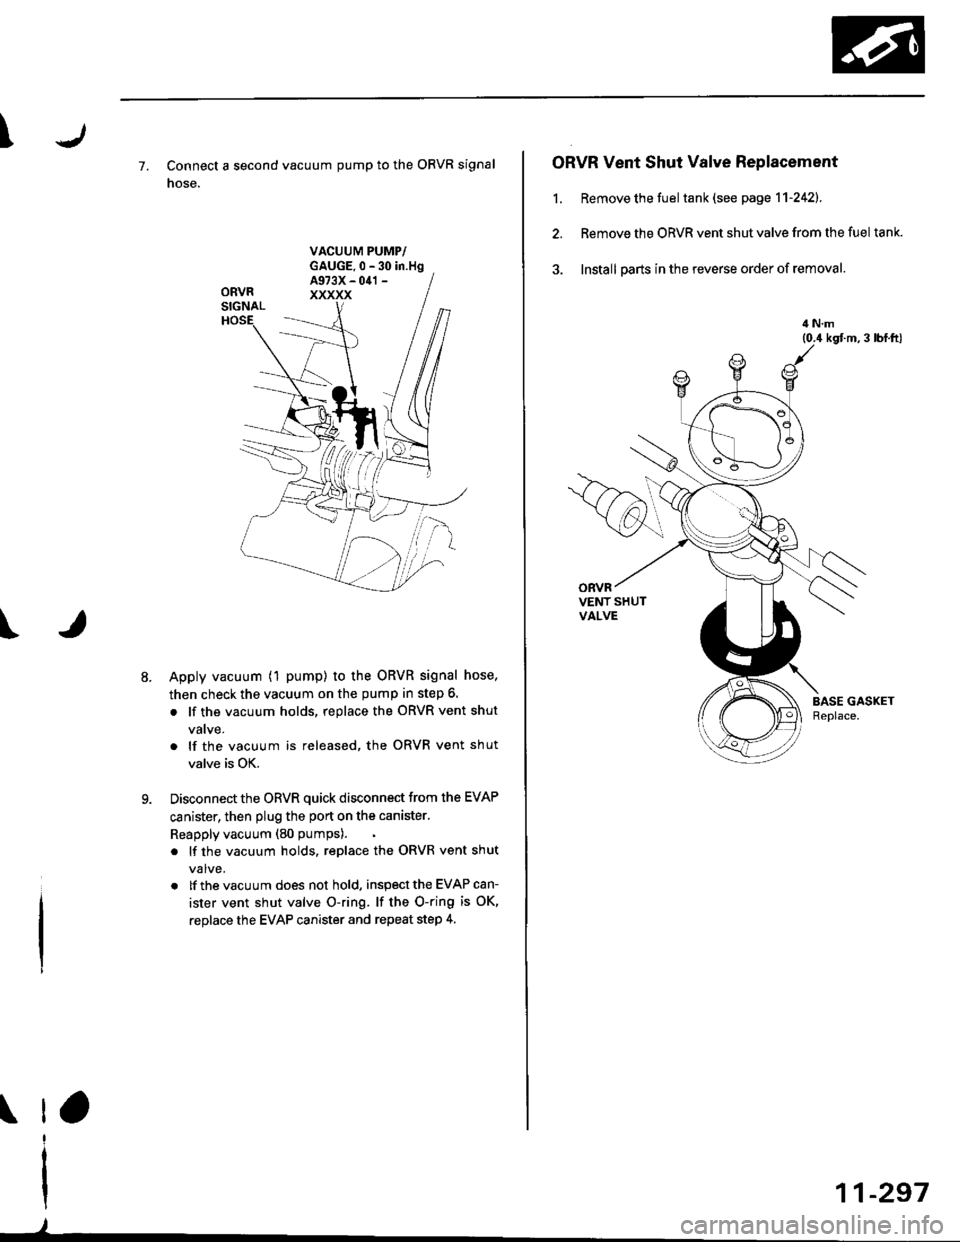 HONDA CIVIC 1996 6.G Workshop Manual \
\
7. Connect a second vacuum pump to the OBVR signal
nose.
VACUUM PUMP/GAUGE.0 - 30 in.HgA973X - 041 -
xxxxx
Apply vacuum (1 pump) to the ORVR signal hose,
then check the vacuum on the pump in step 